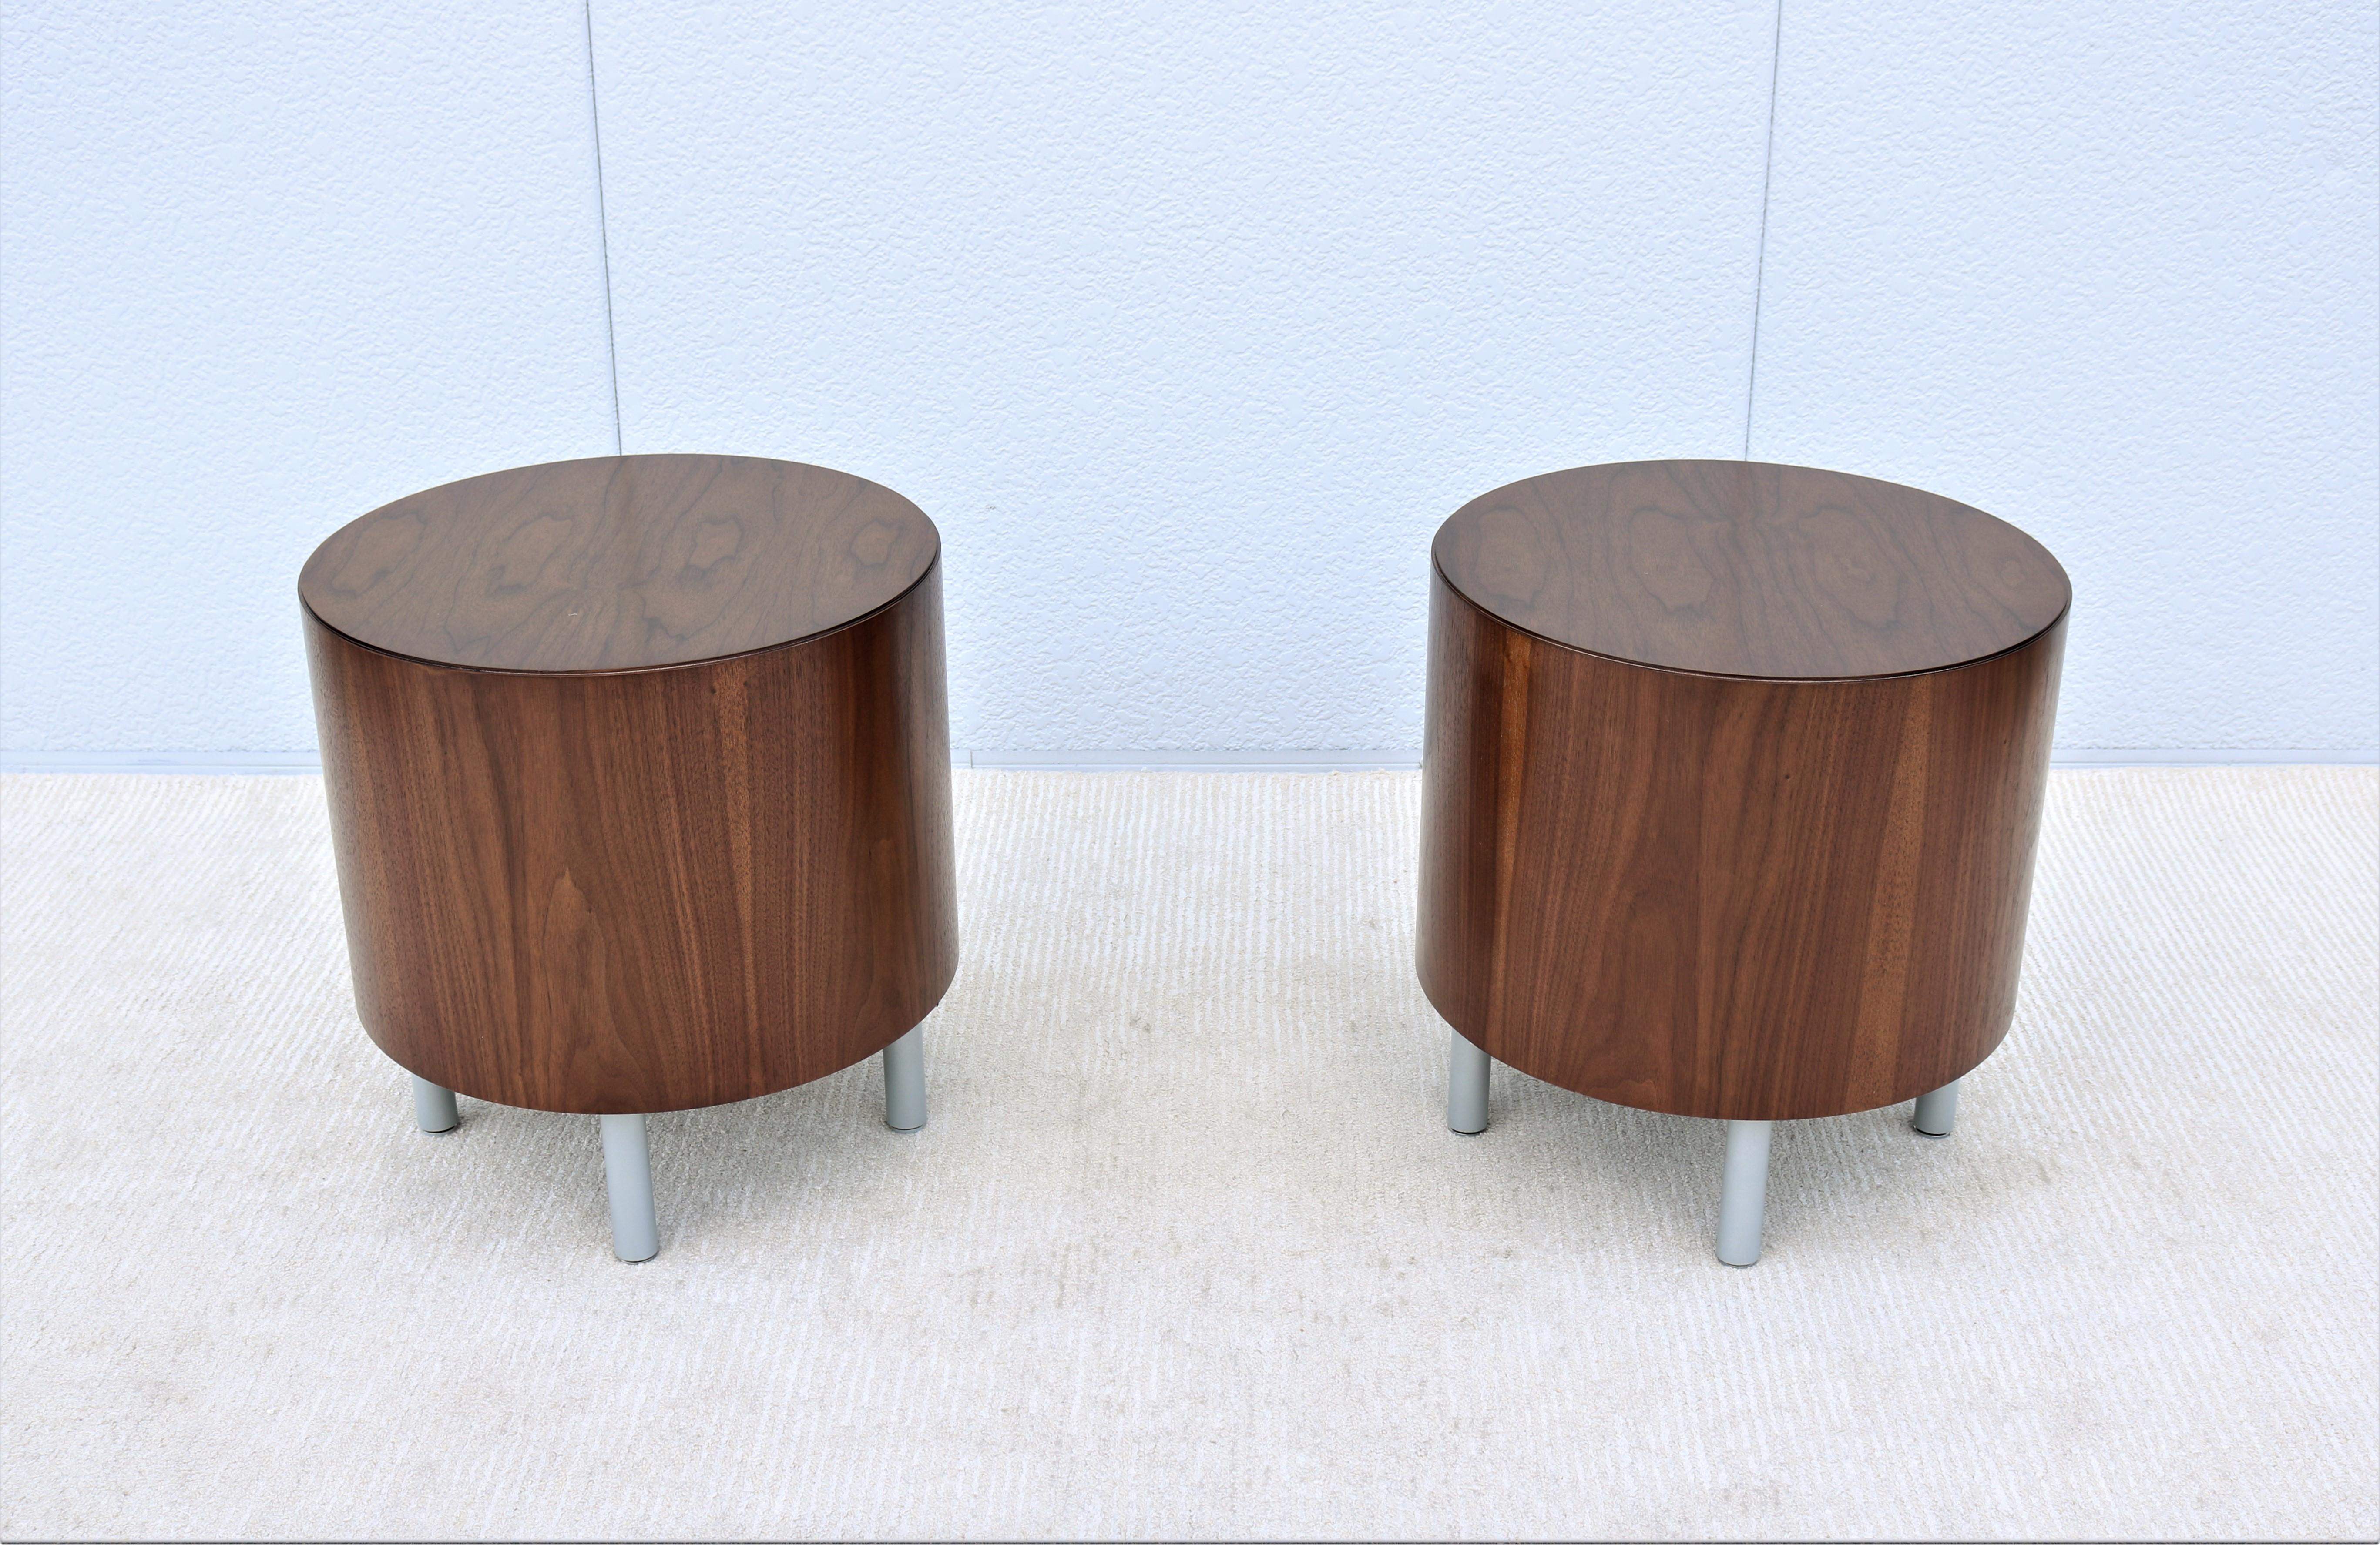 Stunning pair of walnut cylinder drum side or end tables by Kimball. 
Drum tables address a number of functional requirements and fits seamlessly into any environment.
This gorgeous tables combine the elegance you desire with the functionality you